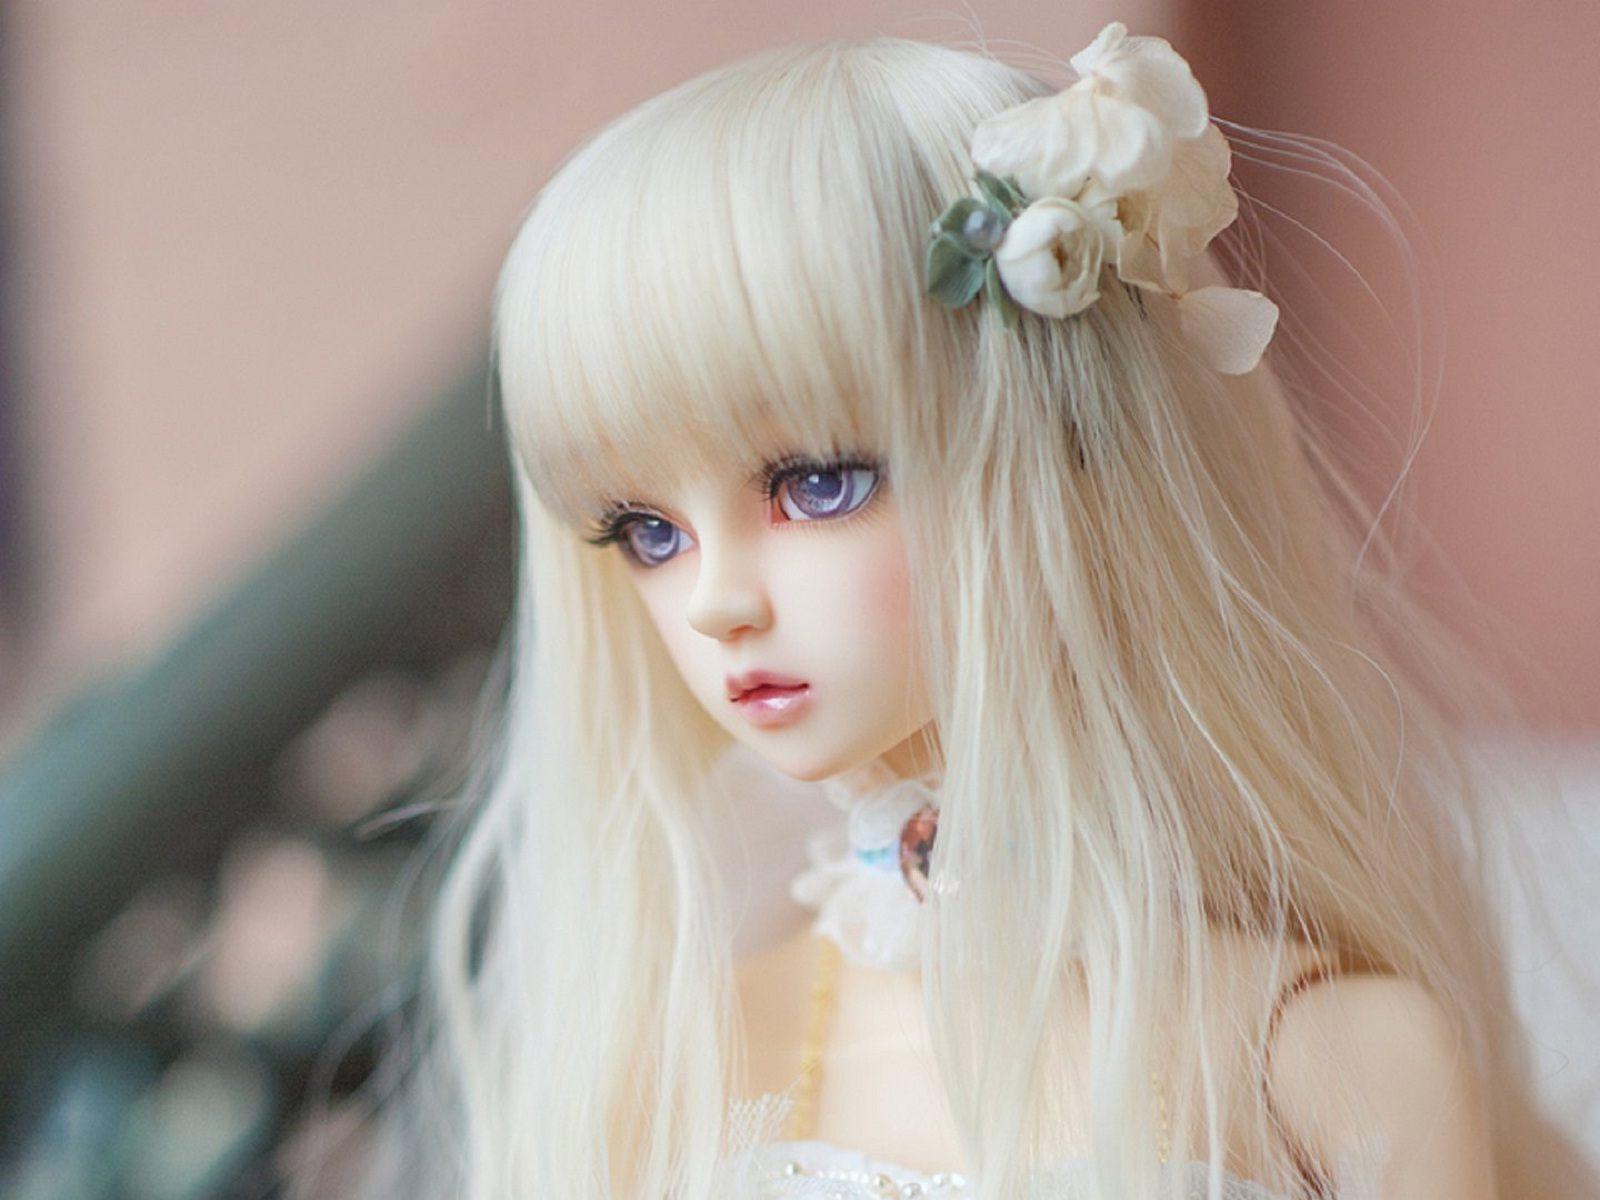 Very Cute Doll Wallpapers For Facebook